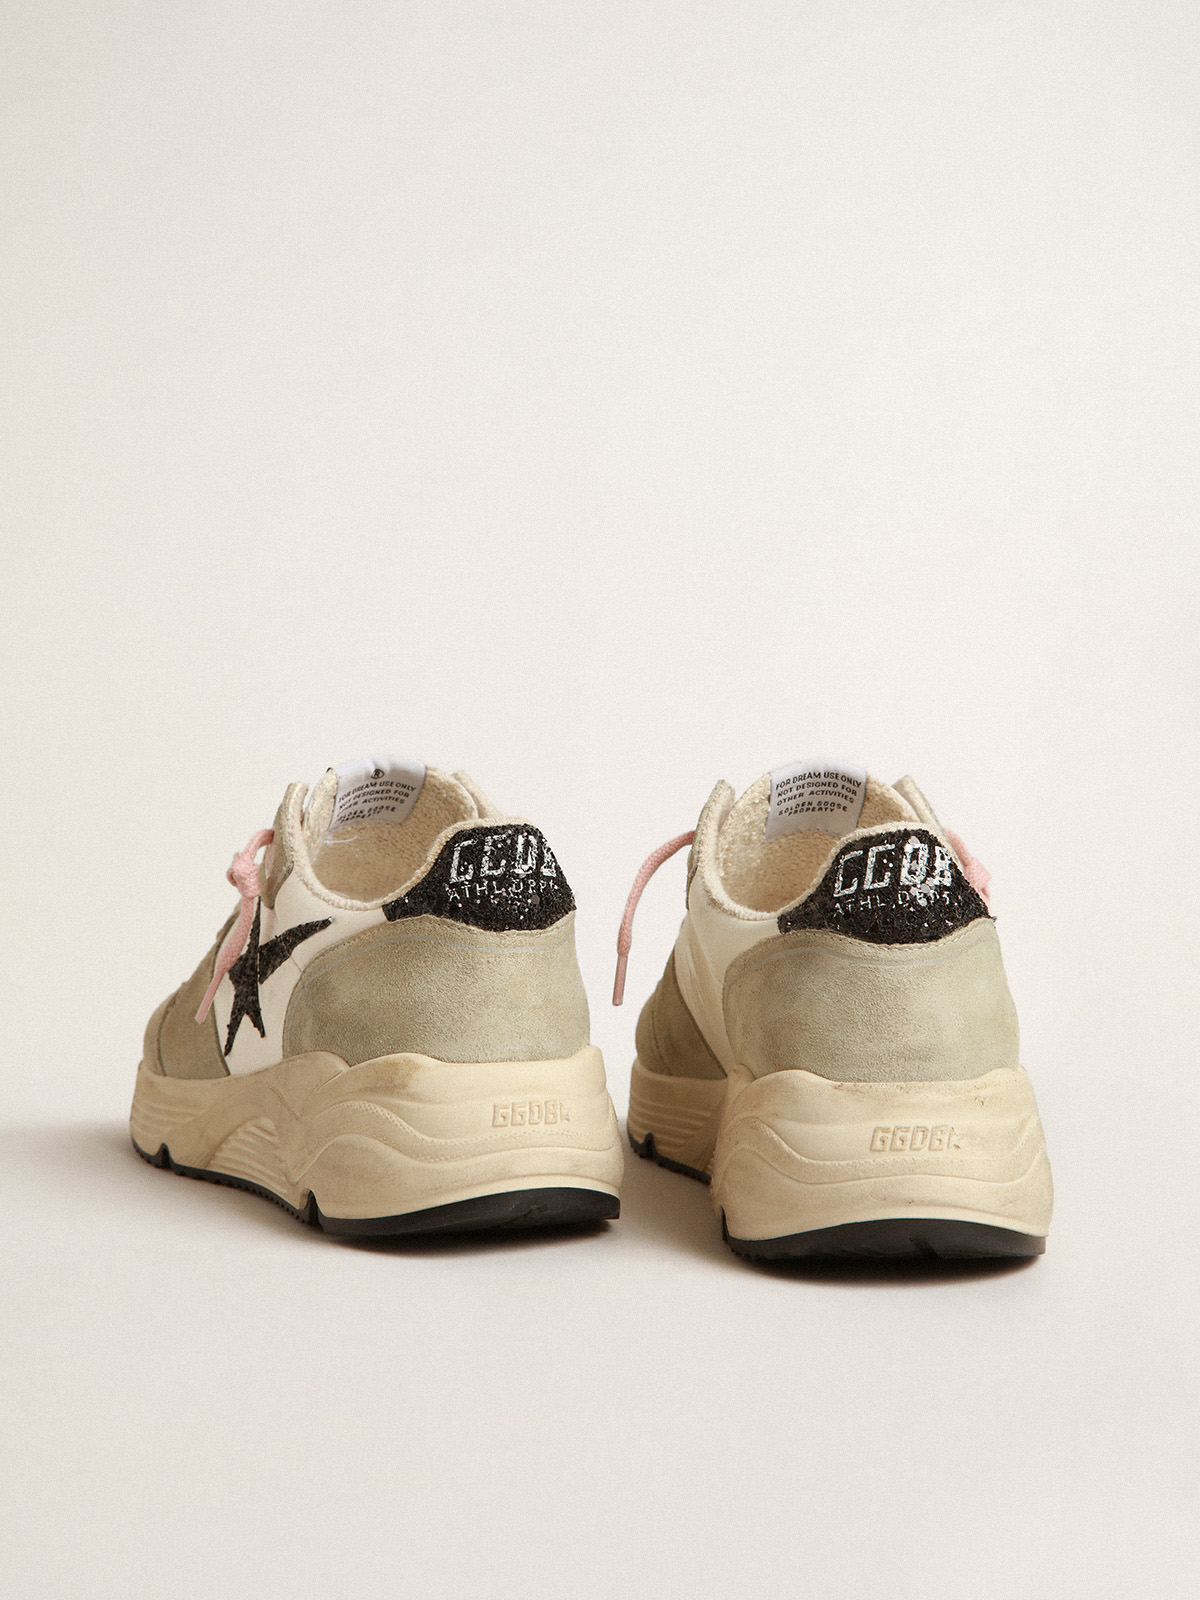 Running Sole with gray suede inserts and black glitter star | Golden Goose